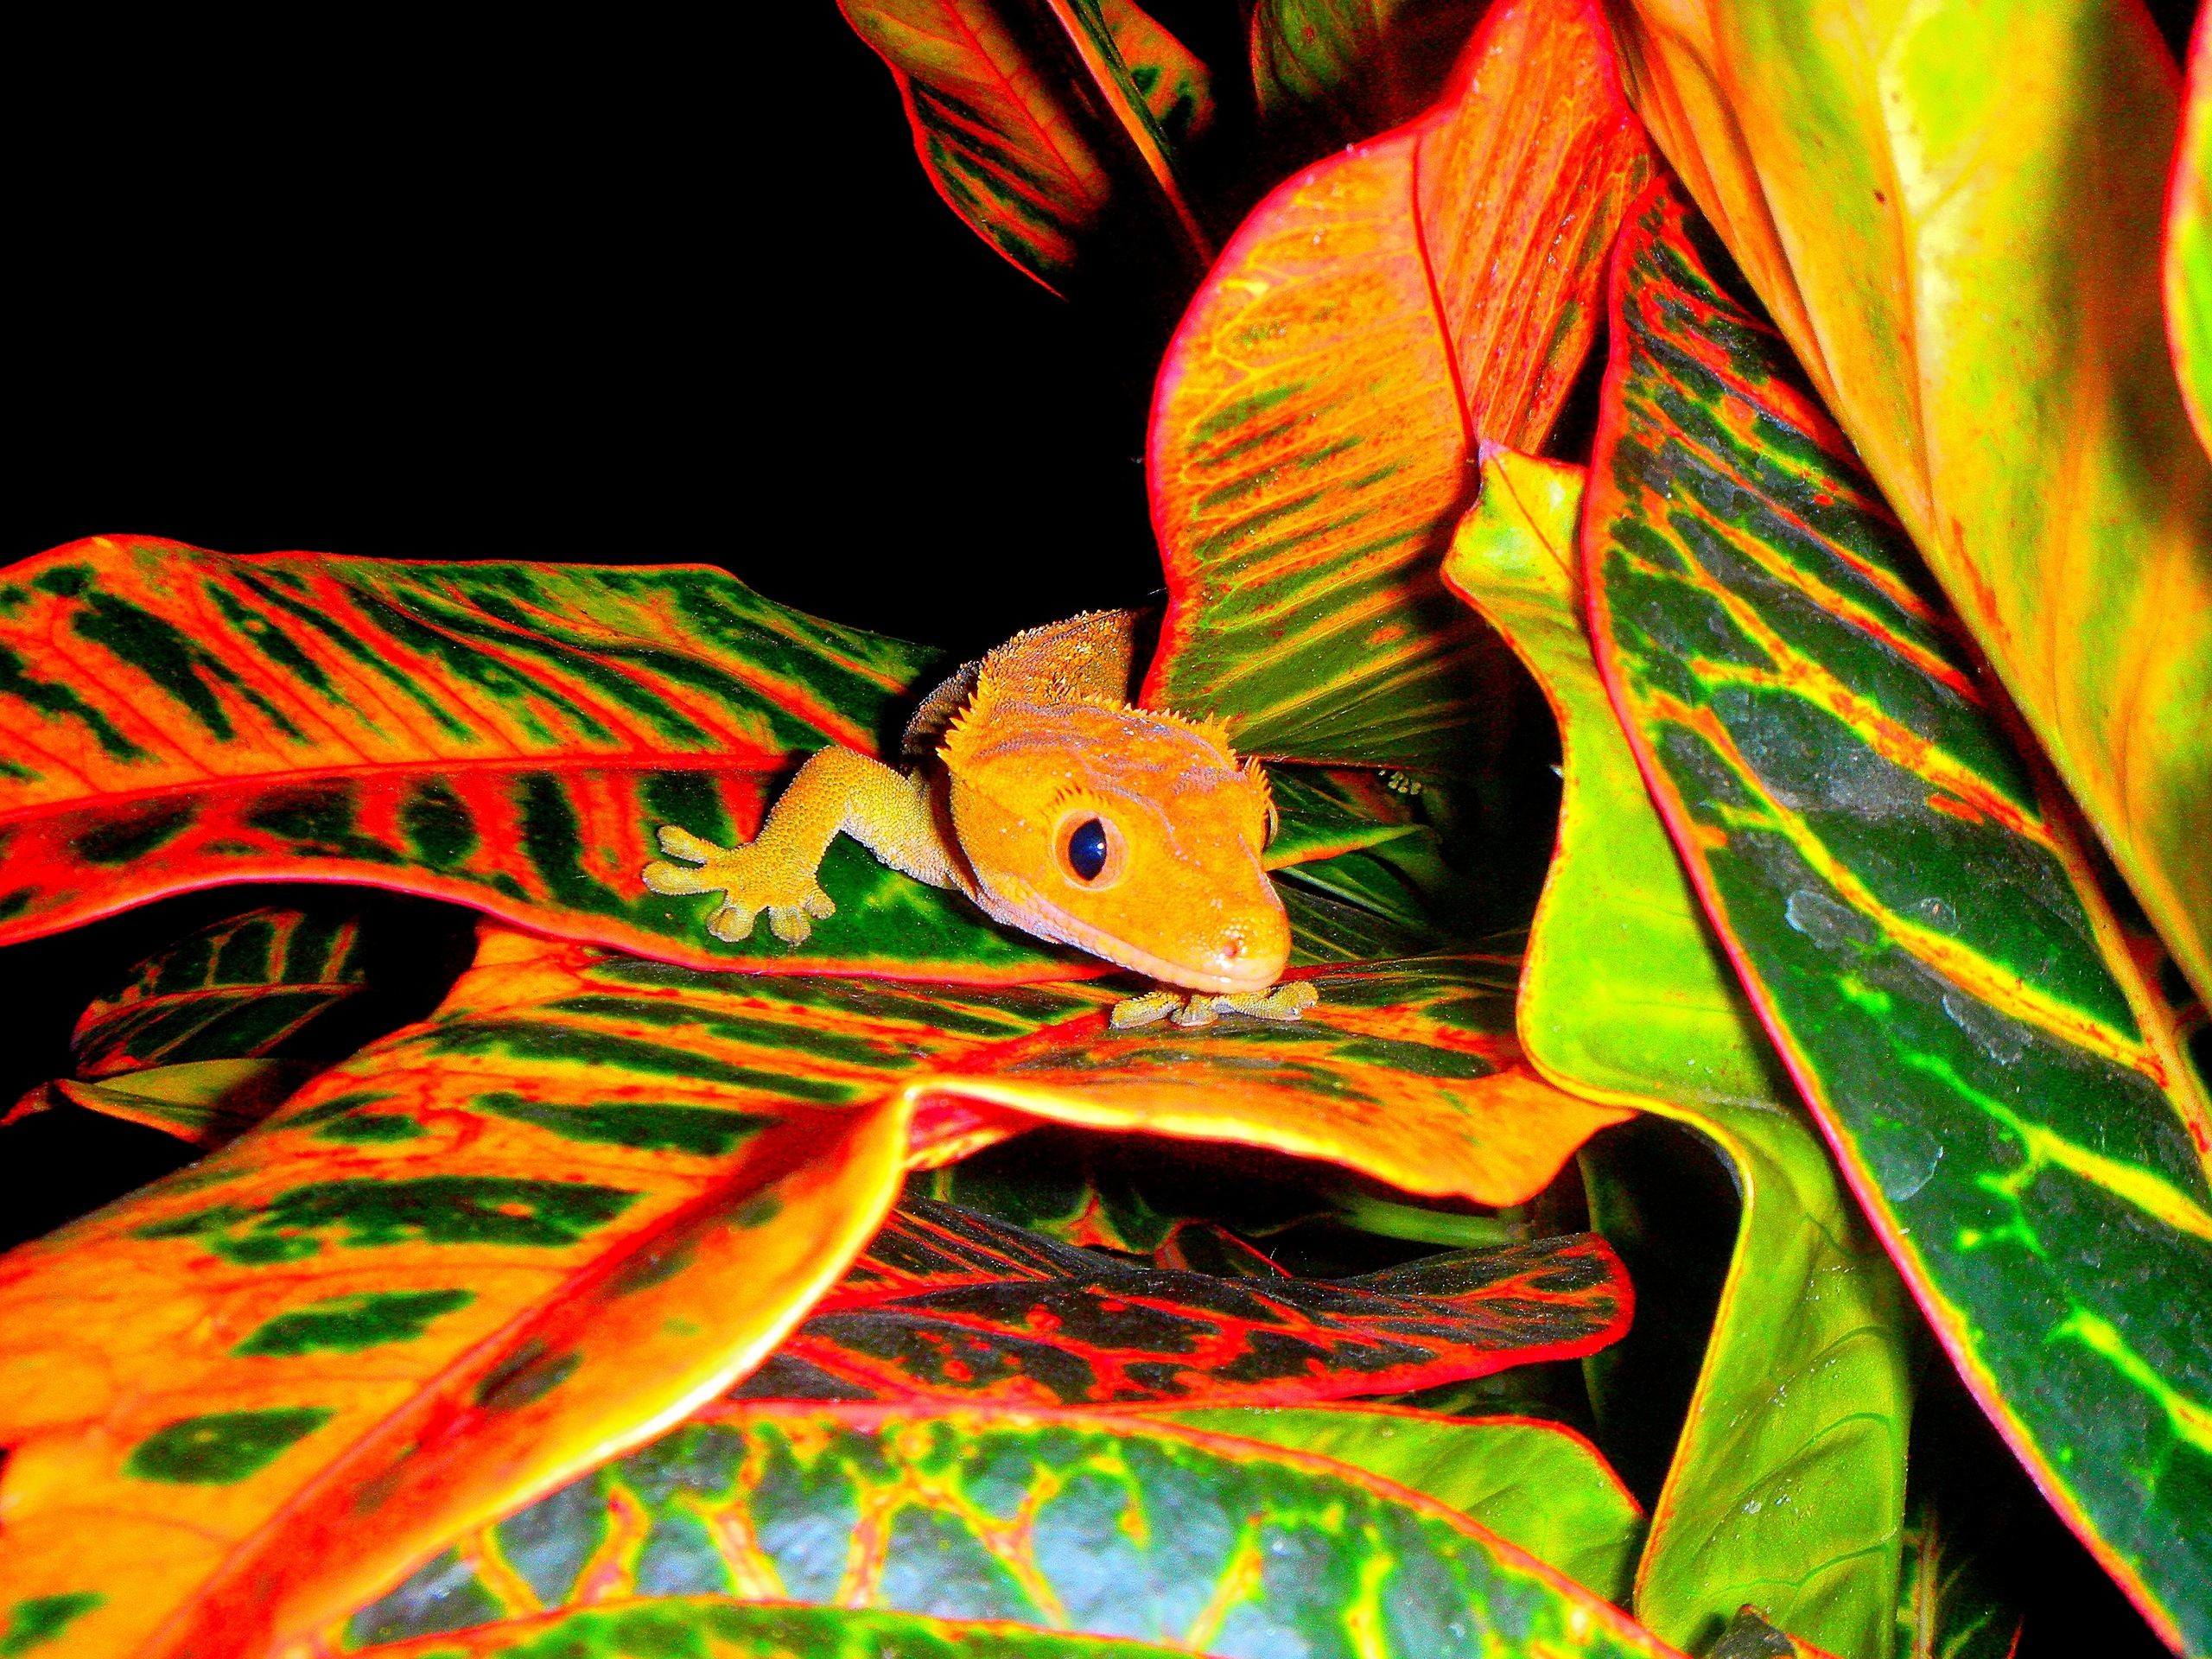 2560x1920 Reptiles images FLAME ORANGE FEMALE CRESTED GECKO IN A CROTON PLANT HD  wallpaper and background photos